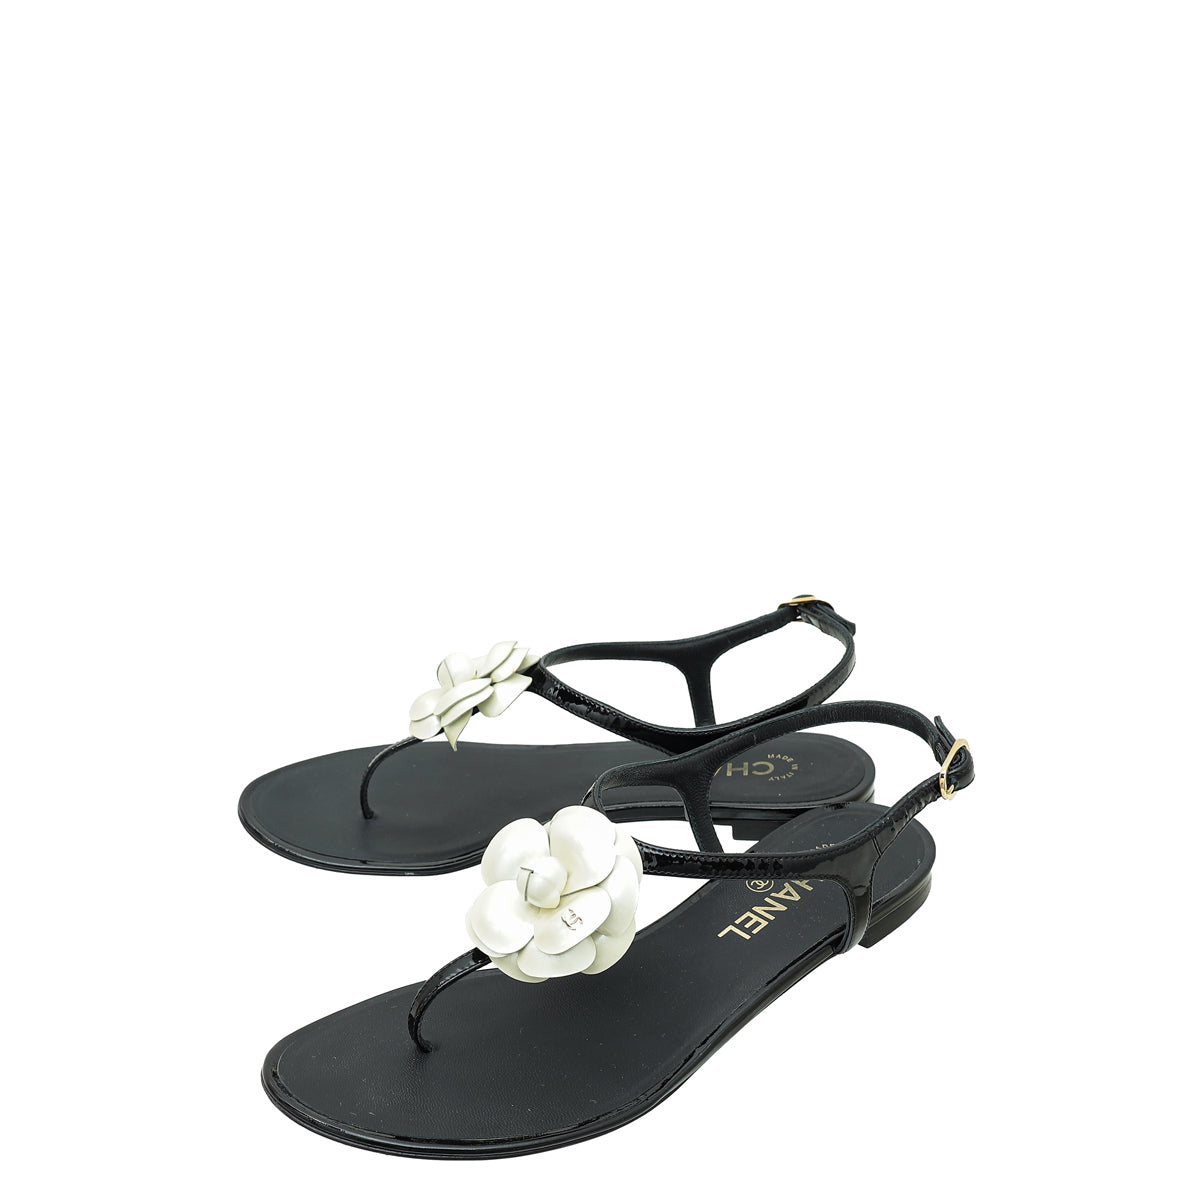 ‘Sold’ CHANEL Black & Cream Camellia Flower Jelly Sandals 38